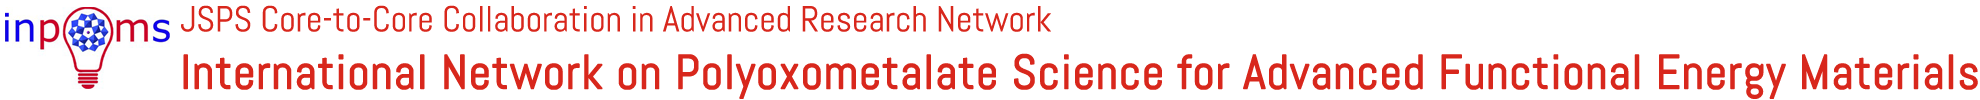 JSPS Core-to-Core Collaboration in Advanced Research Network - International Network on Polyoxometalate Science for Advanced Functional Energy Materials